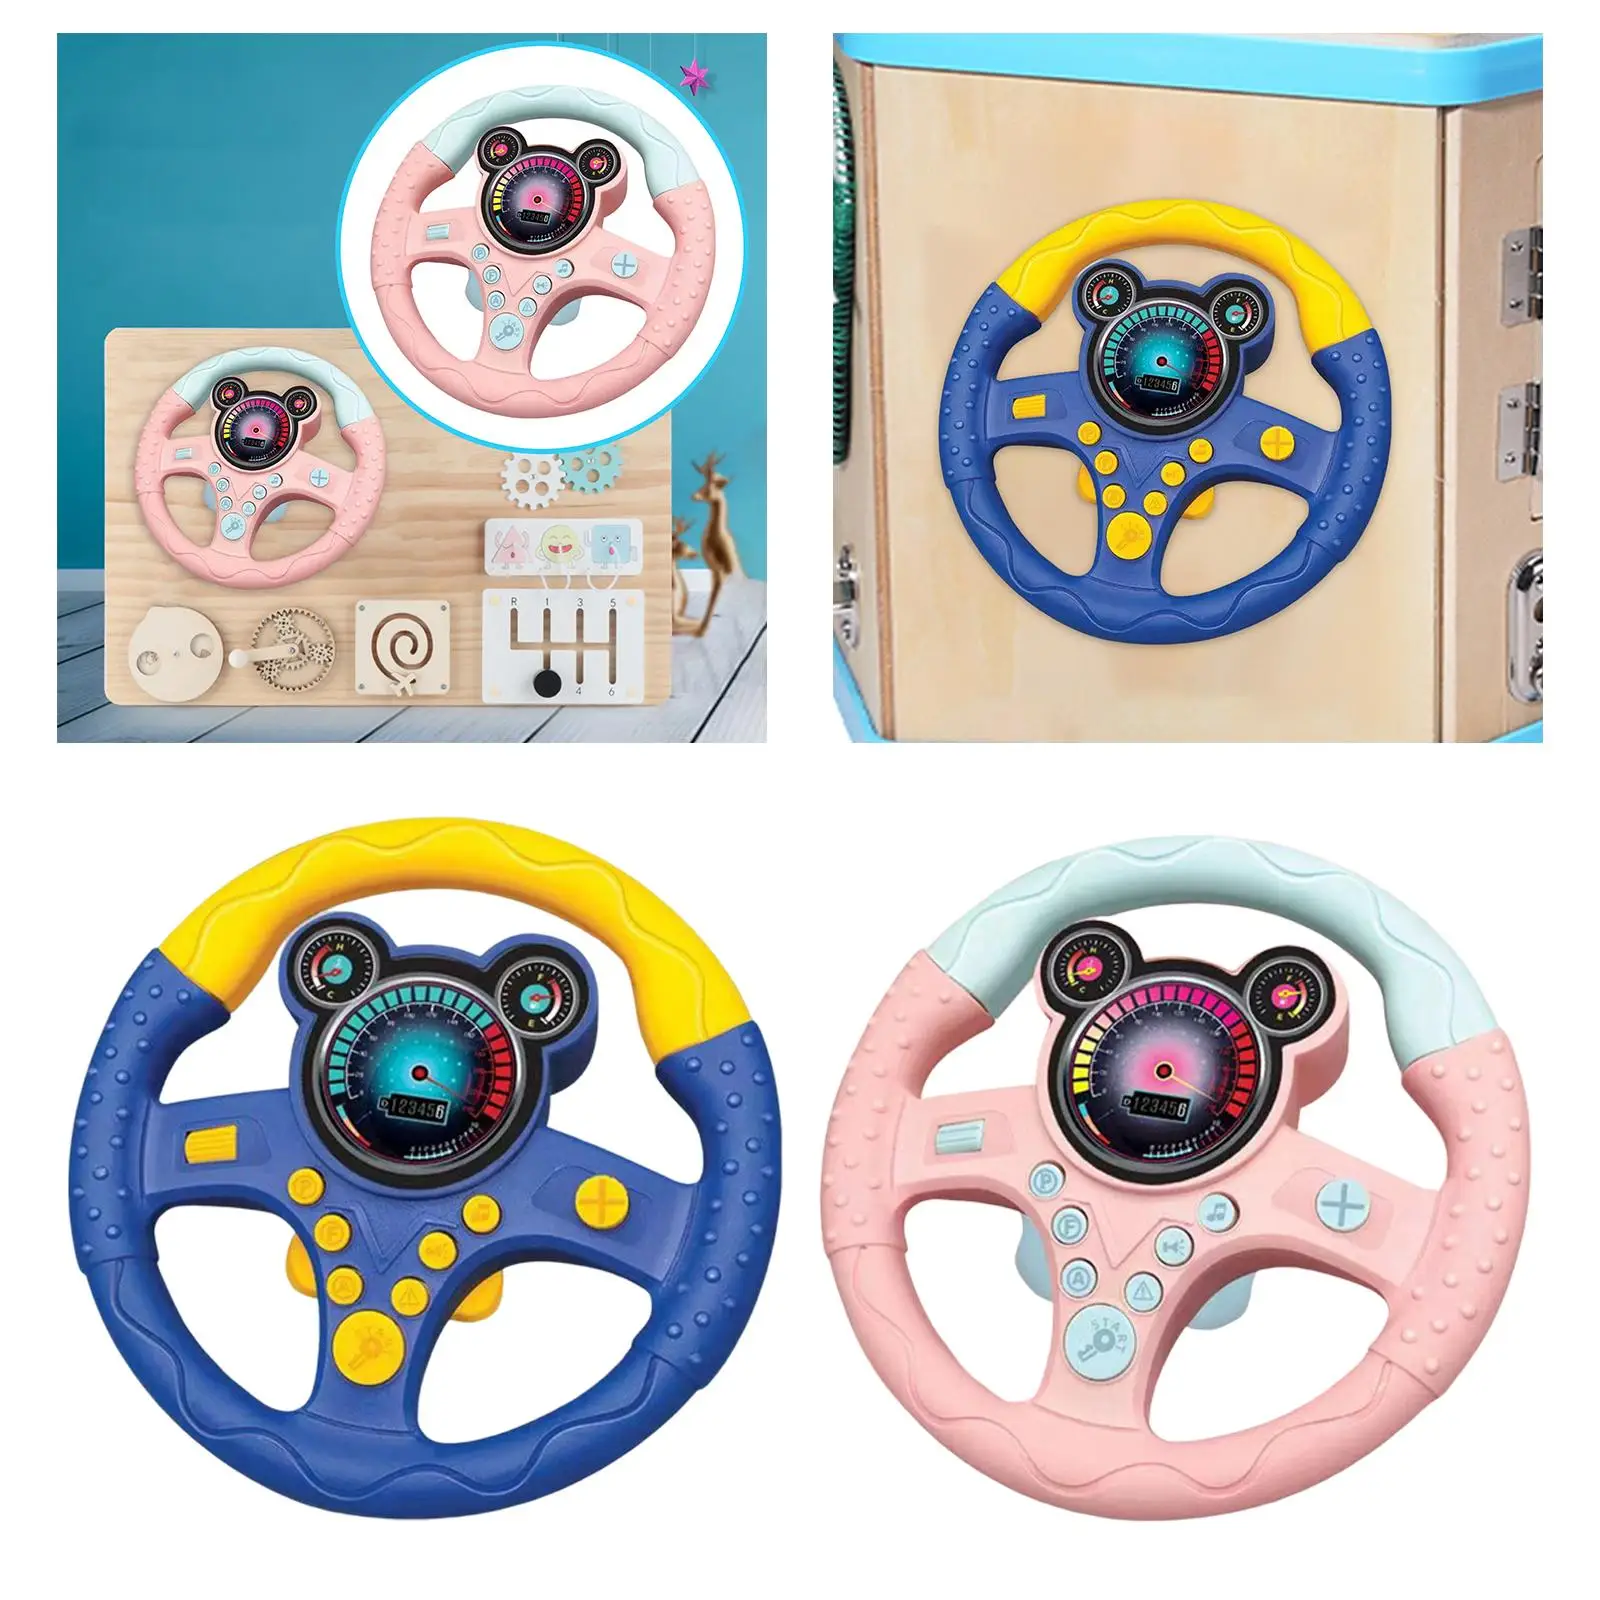 Simulated Steering Wheel Battery Powered Driving Kids Electric Wheel Toy for Garden Treehouse Amusement Park Playground Gifts